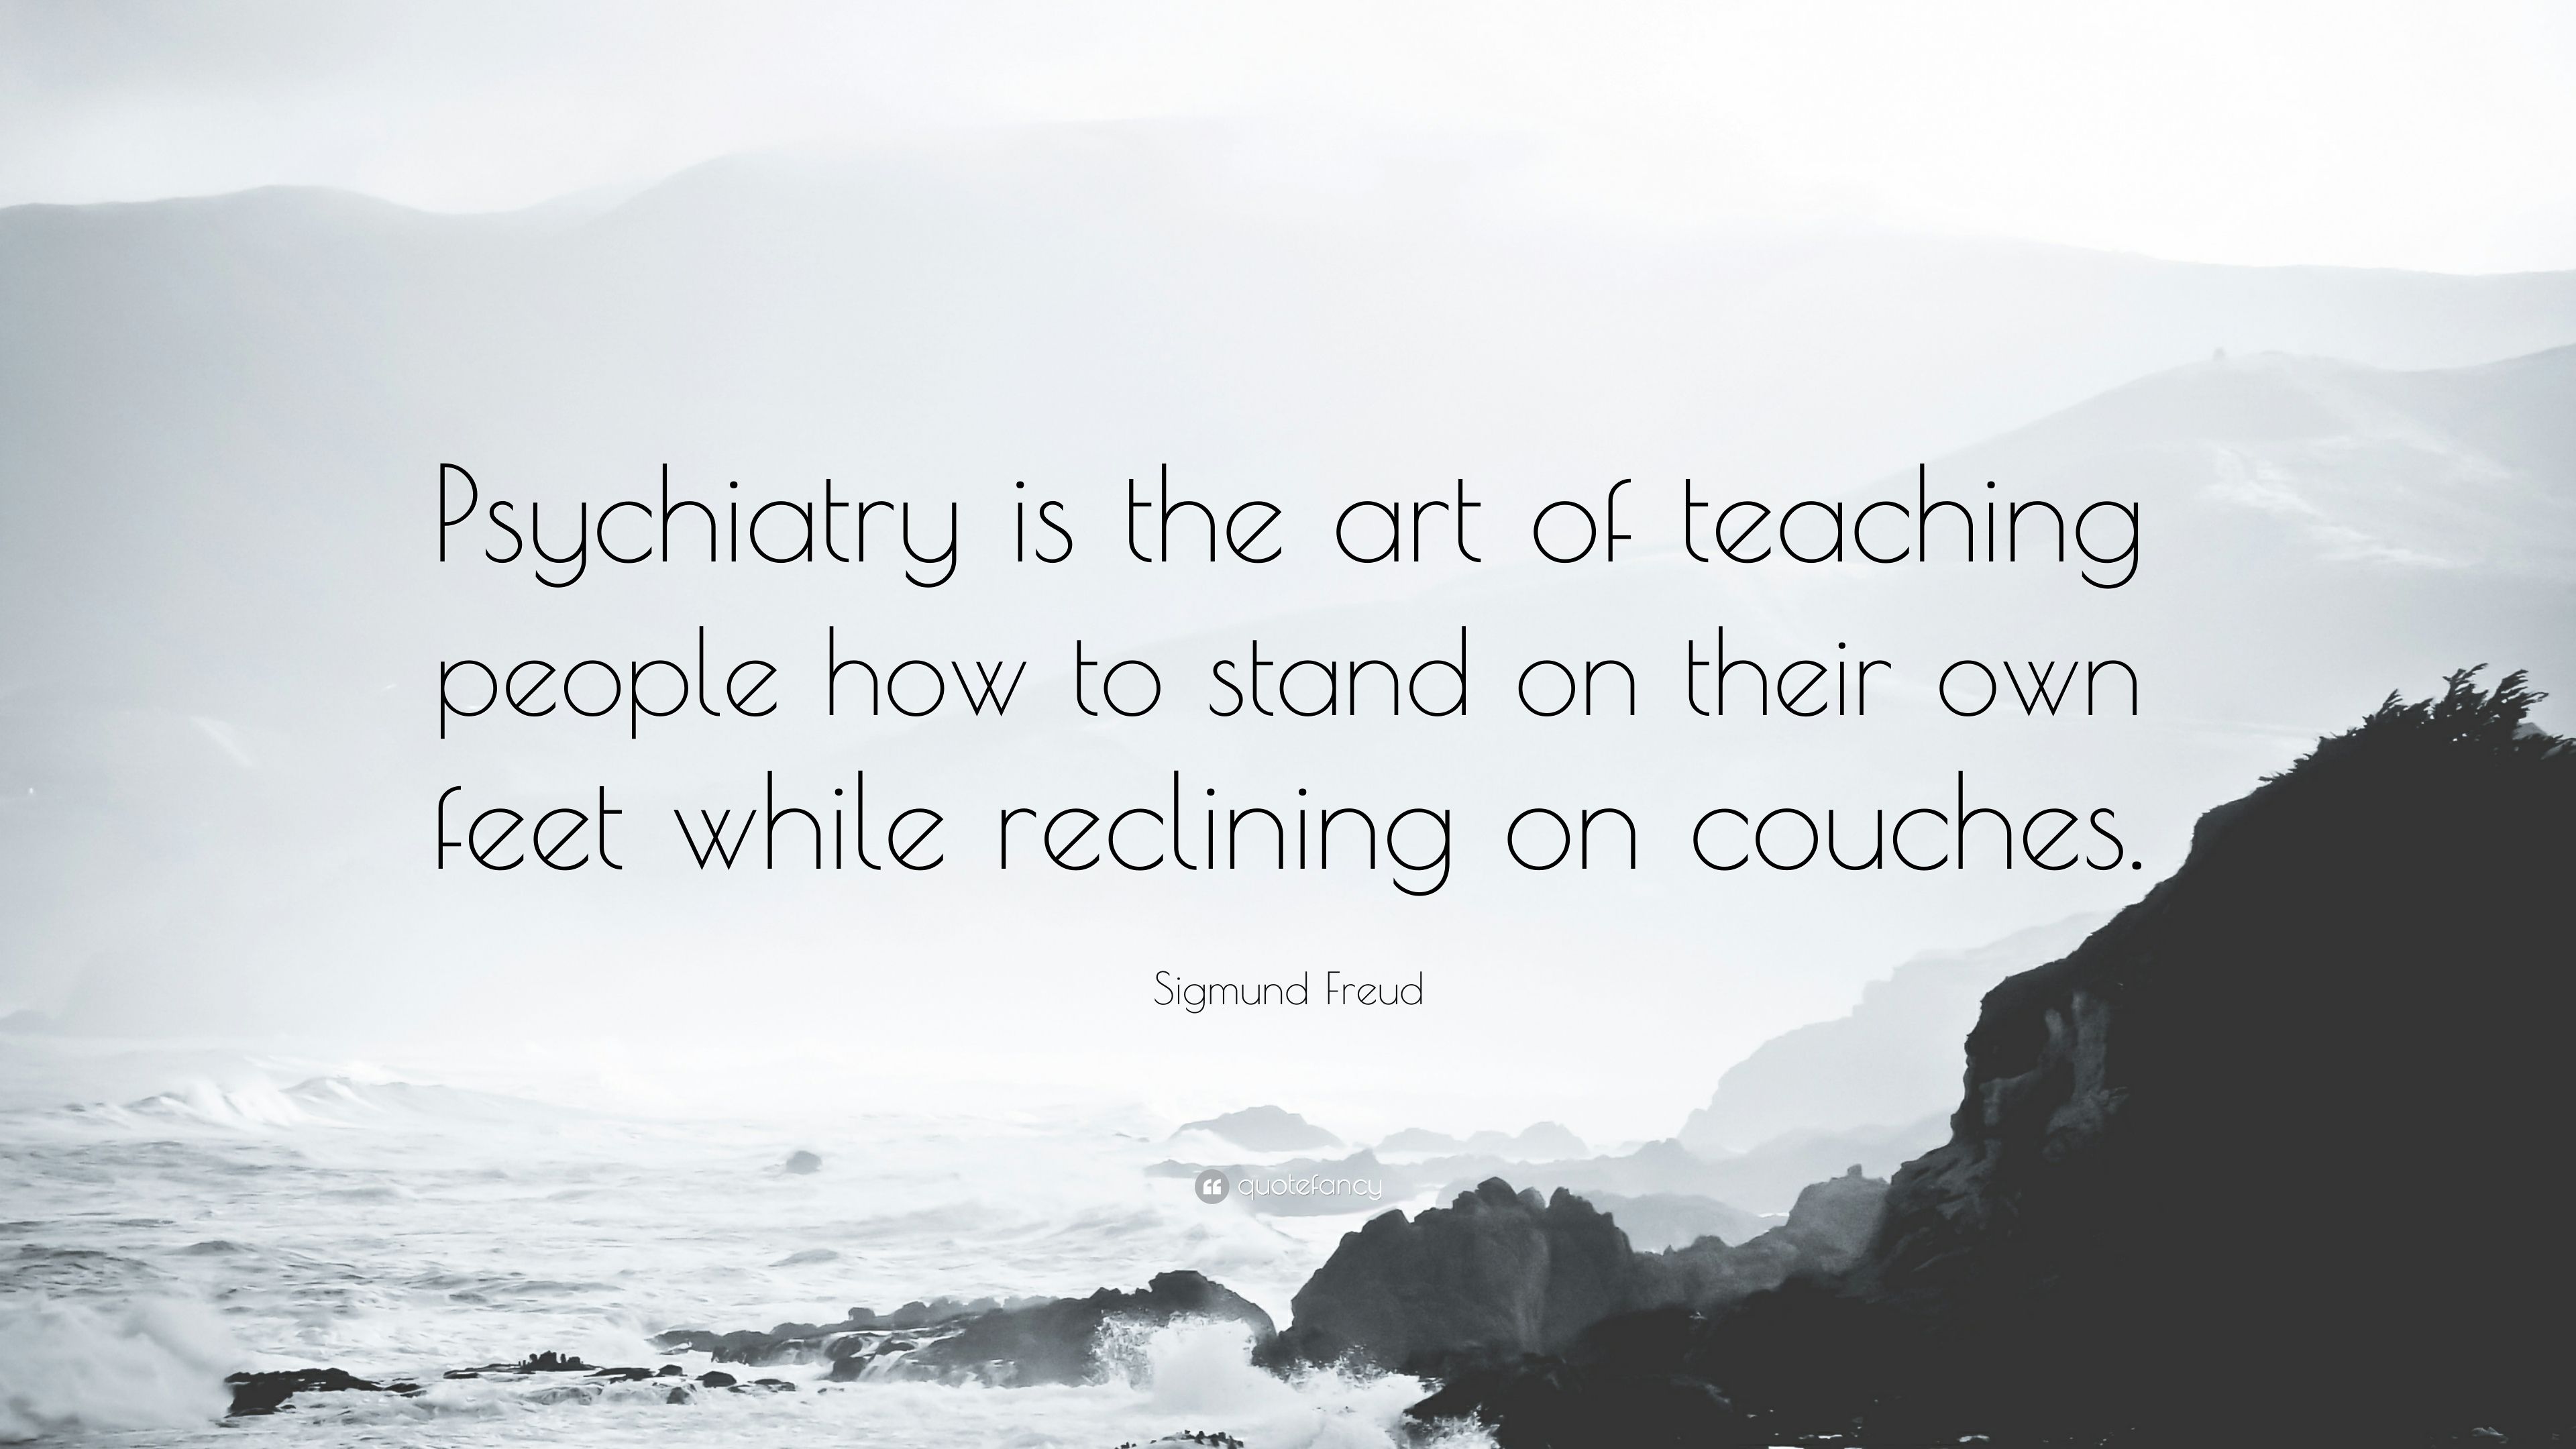 Sigmund Freud Quote: “Psychiatry is the art of teaching people how to stand on their own